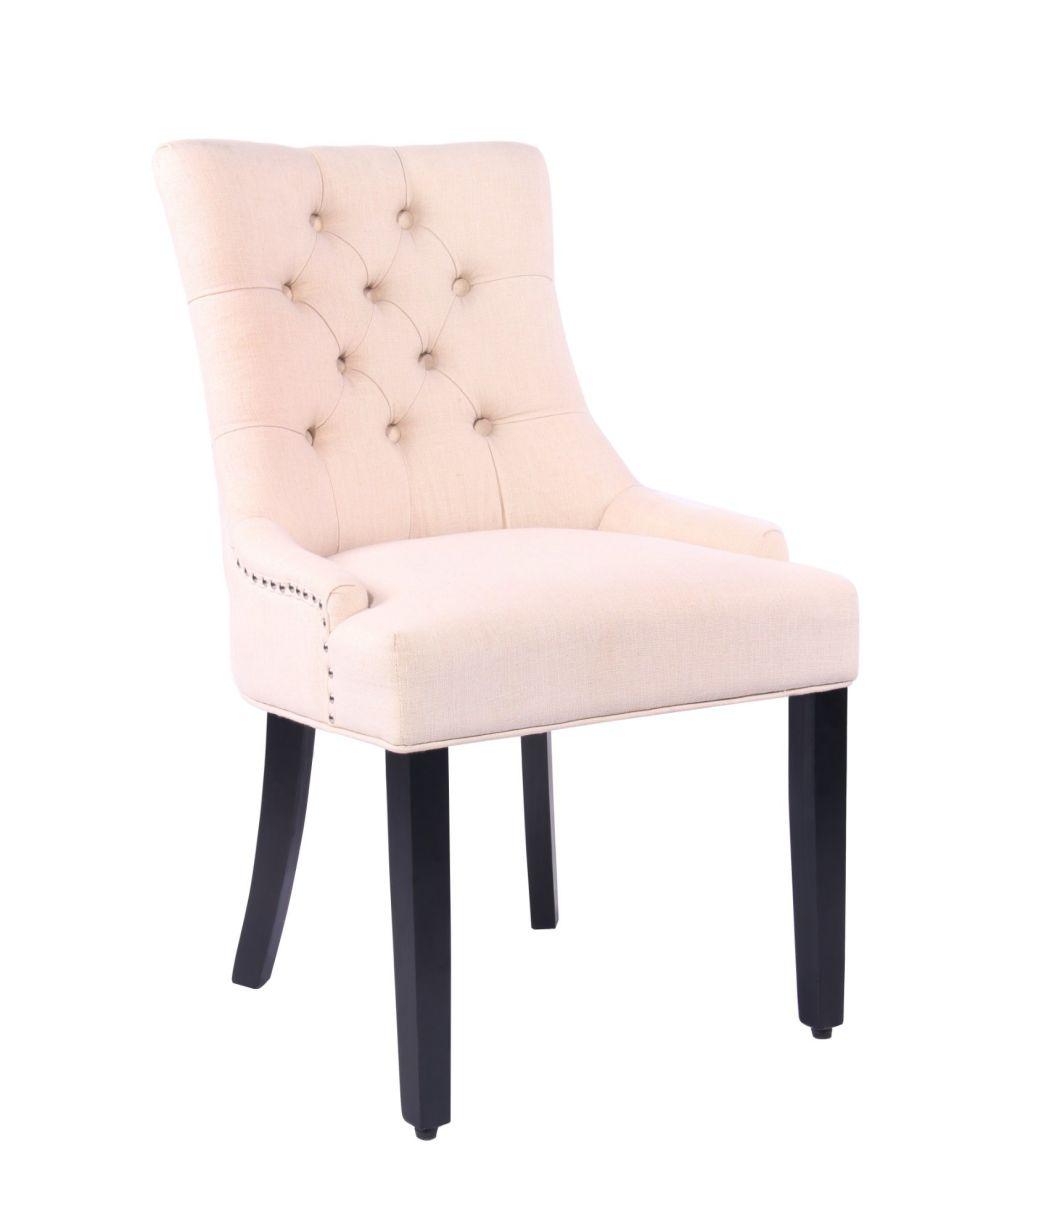 Modern Furniture Classic Dining Wood and Fabric Tufted Upholstered Side Restaurant Dining Chair